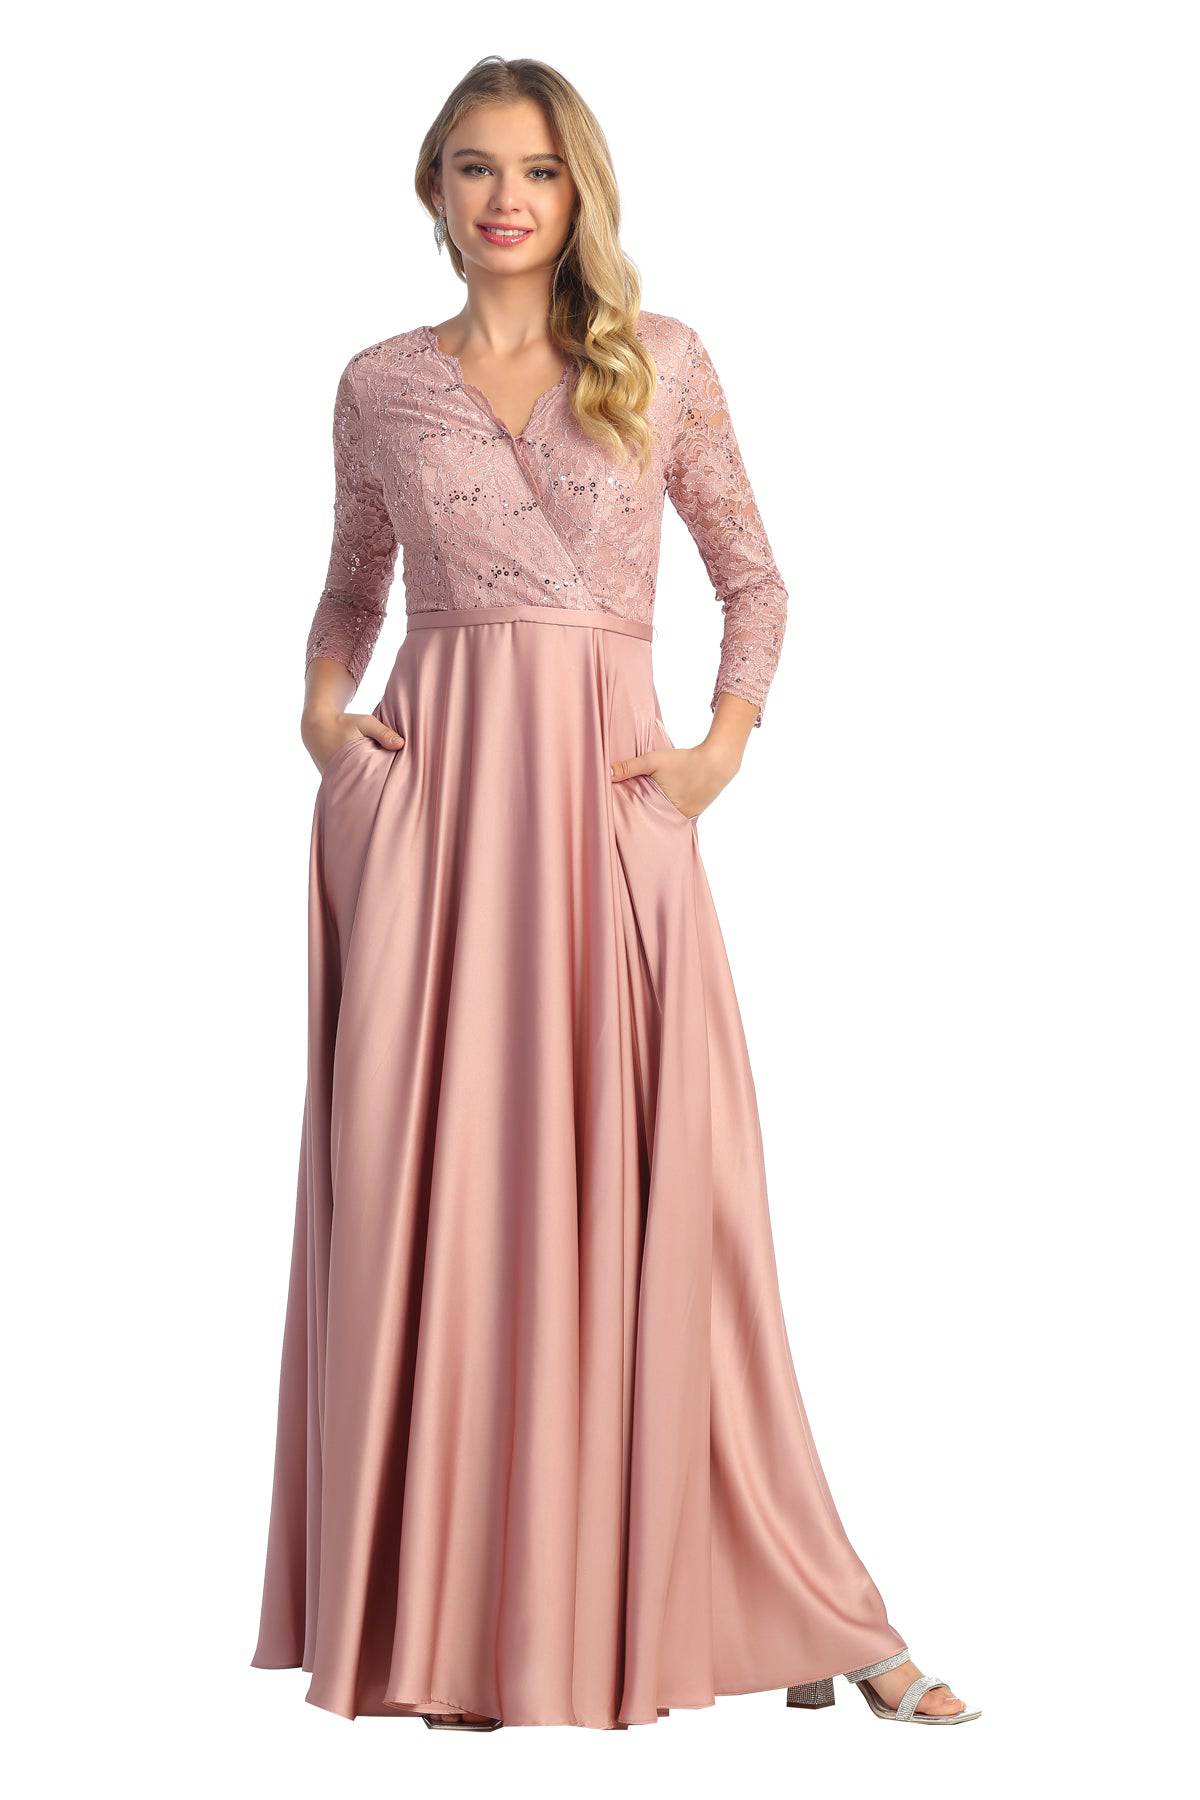 Cindy Collection 1699 Lace Chiffon A Line Dress - NORMA REED